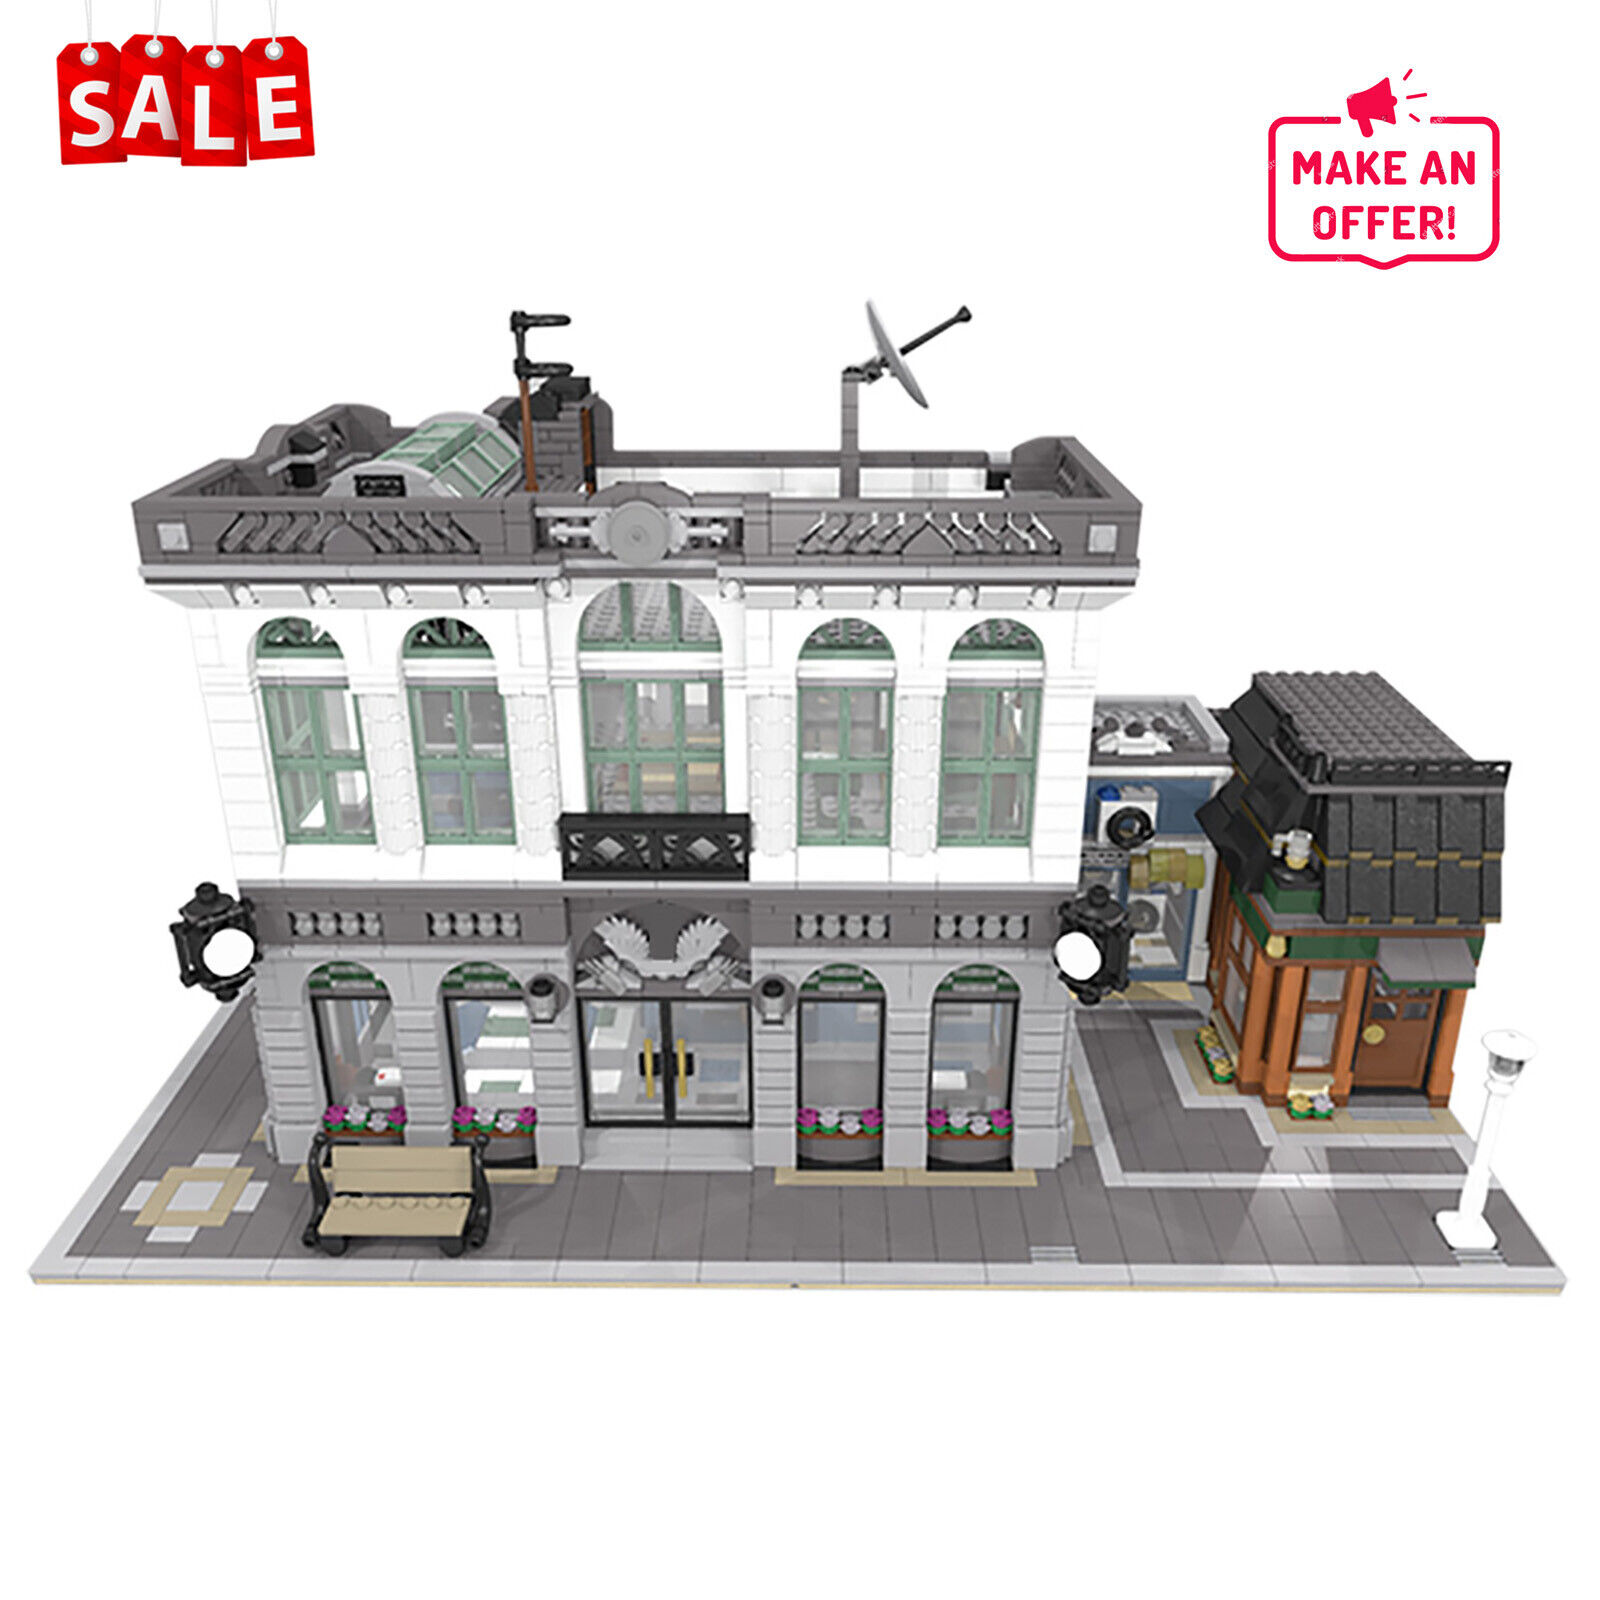 Modular building compatible models added to Pick-a-Brick